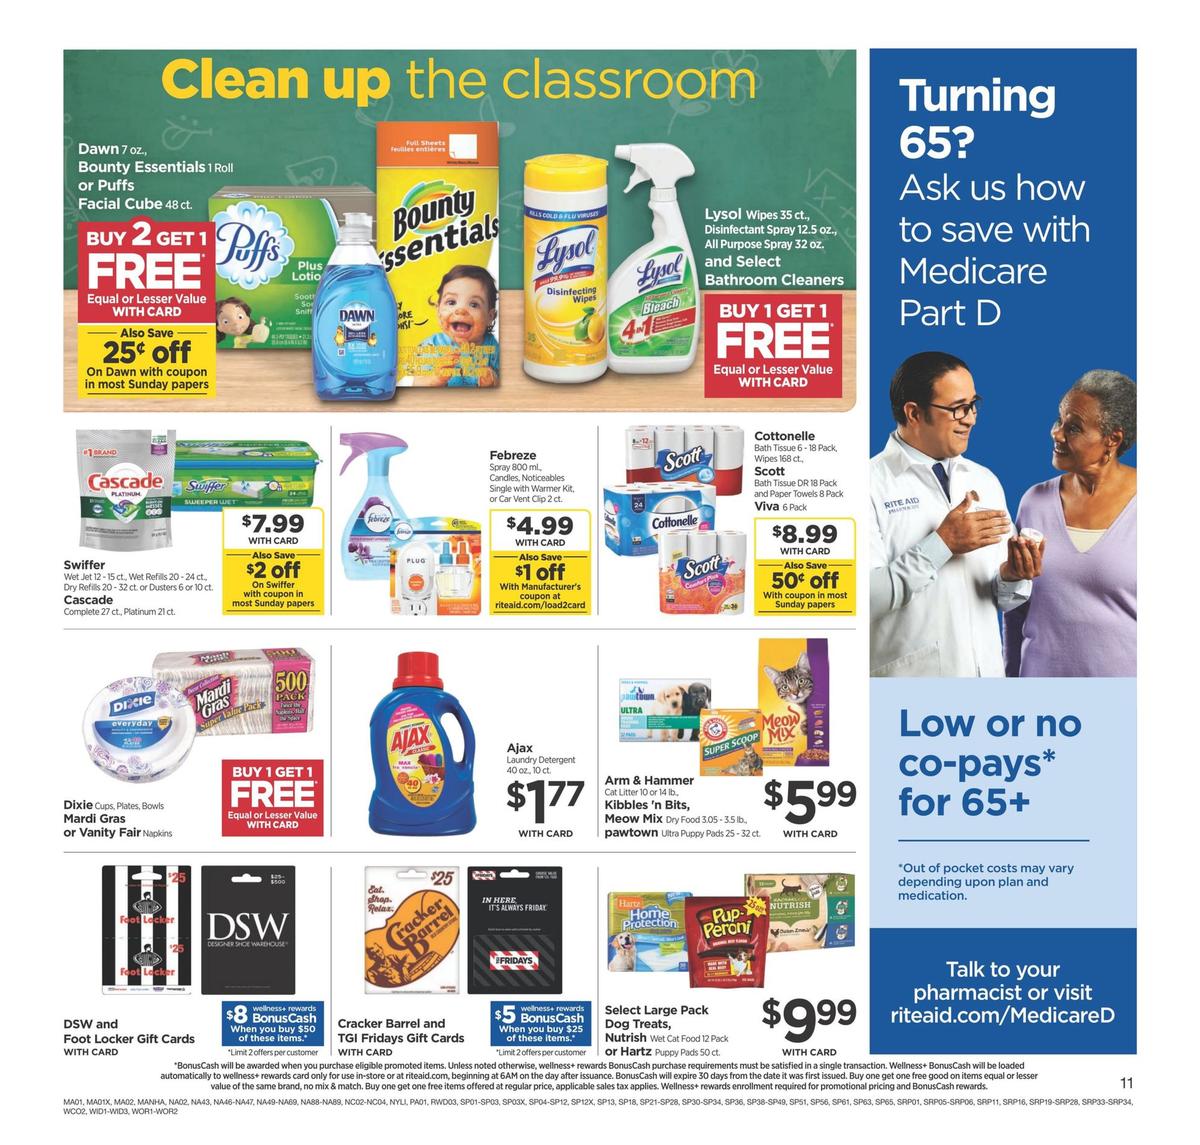 Rite Aid Weekly Ad from July 28